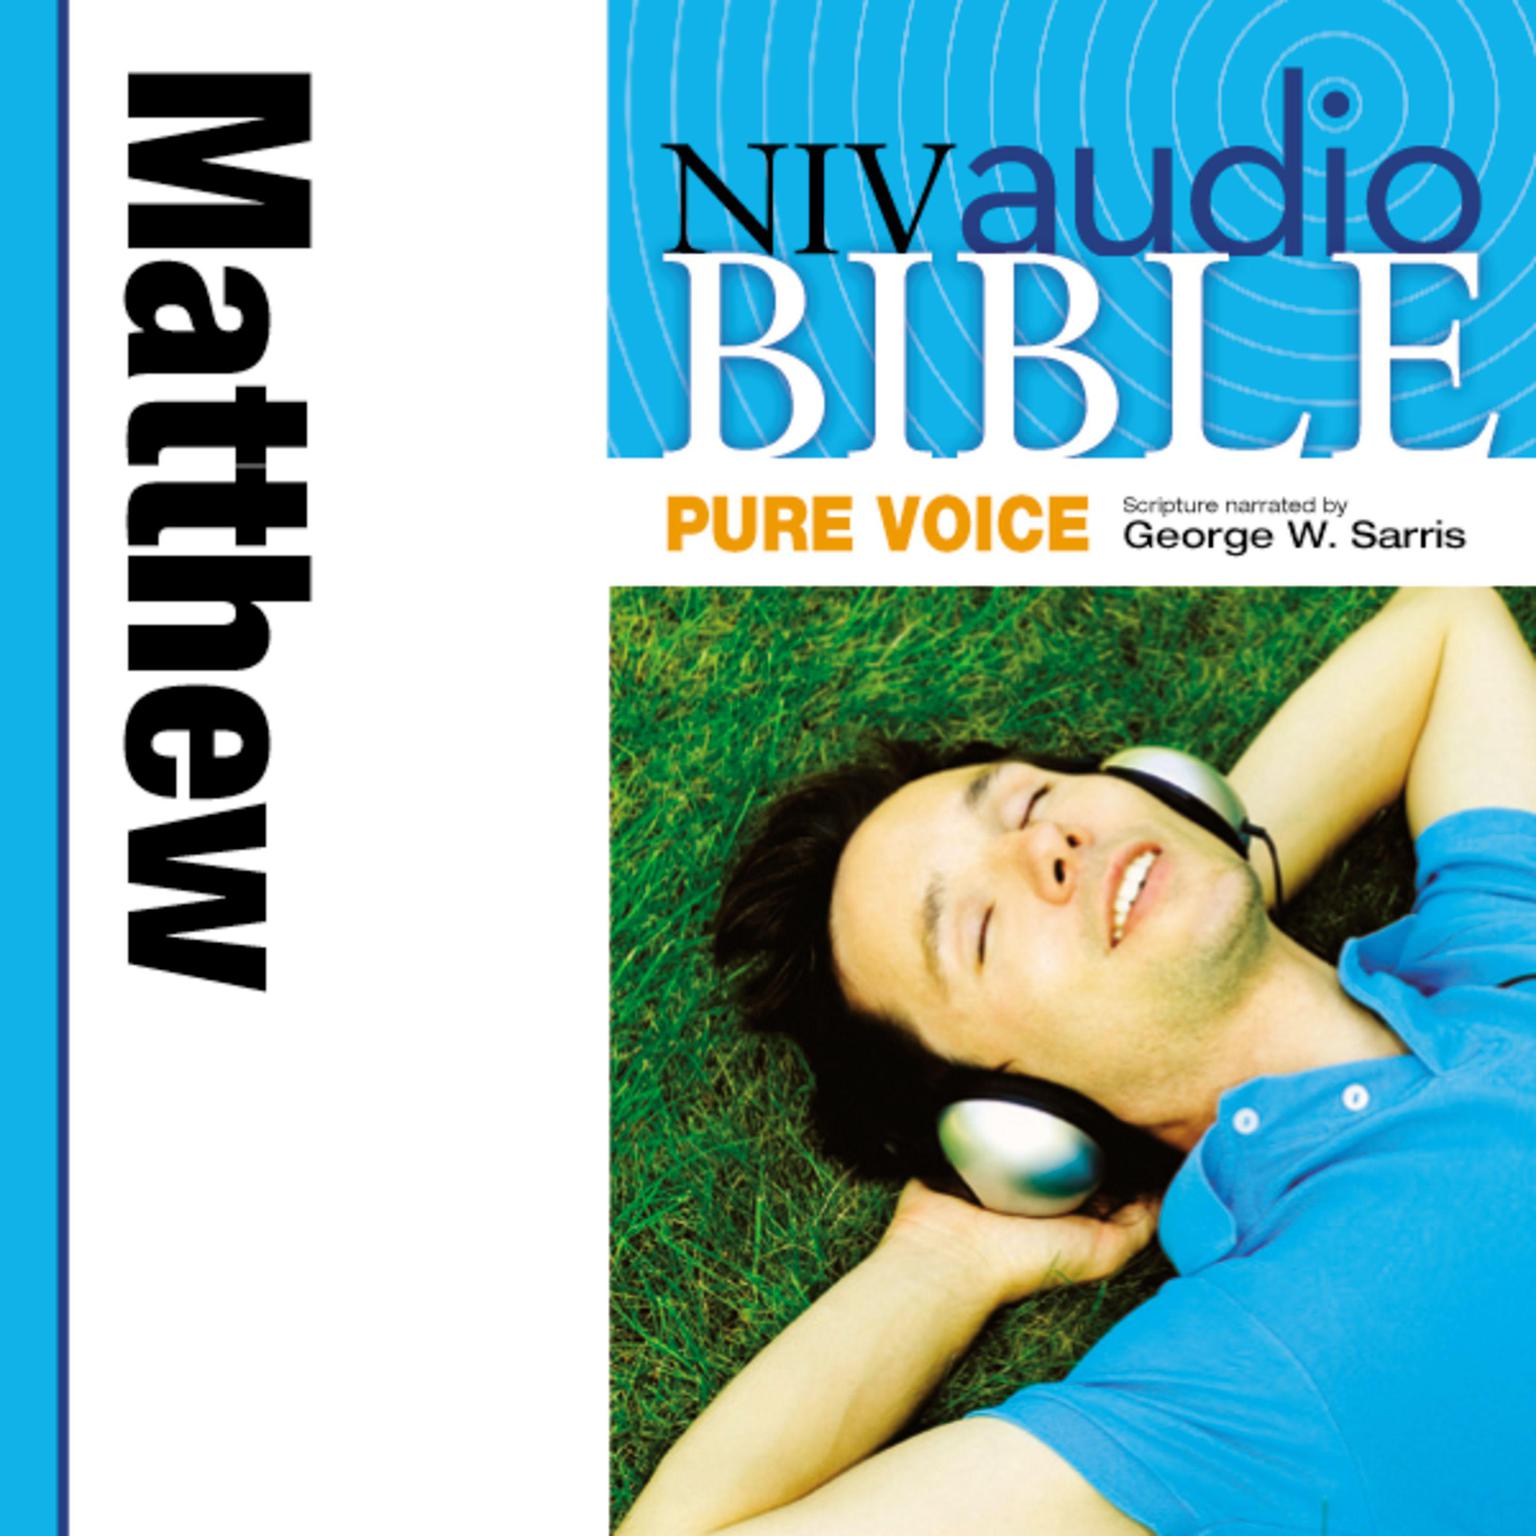 Pure Voice Audio Bible - New International Version, NIV (Narrated by George W. Sarris): (29) Matthew Audiobook, by Zondervan